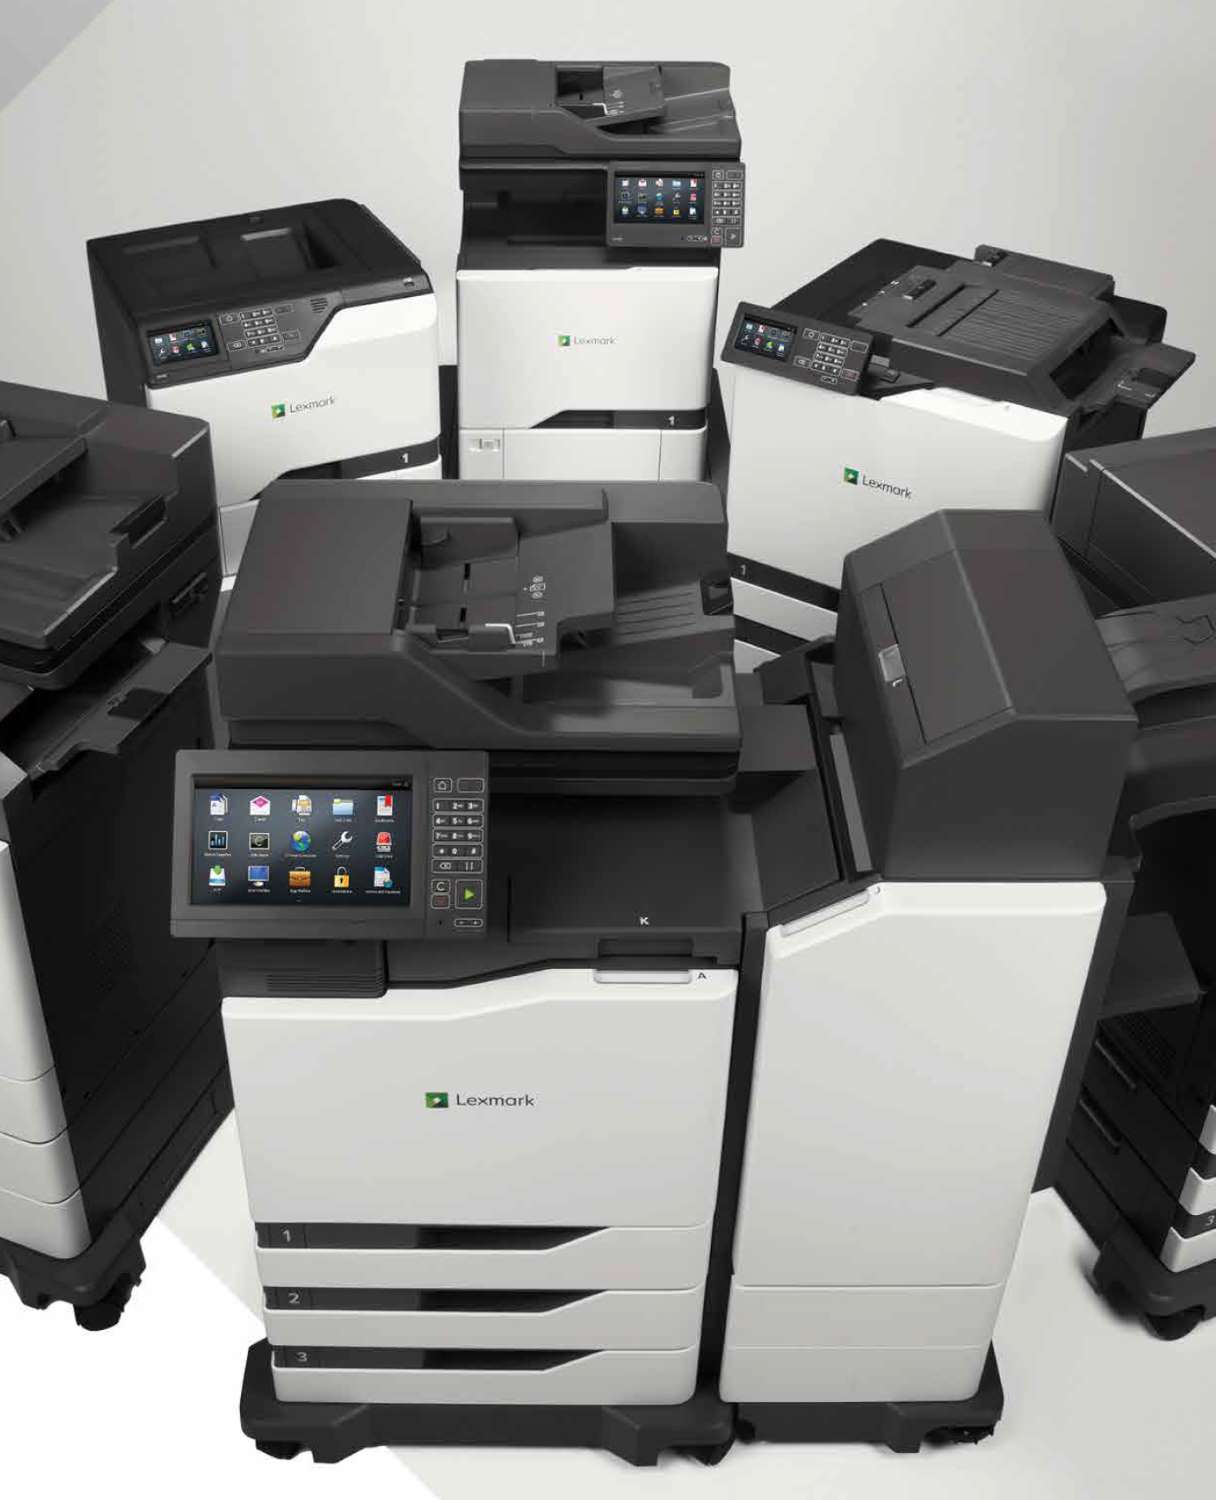 Tech4 Office Equipment in Carlisle, suppliers of photocopiers for lease or sale to businesses across Cumbria & the Borders